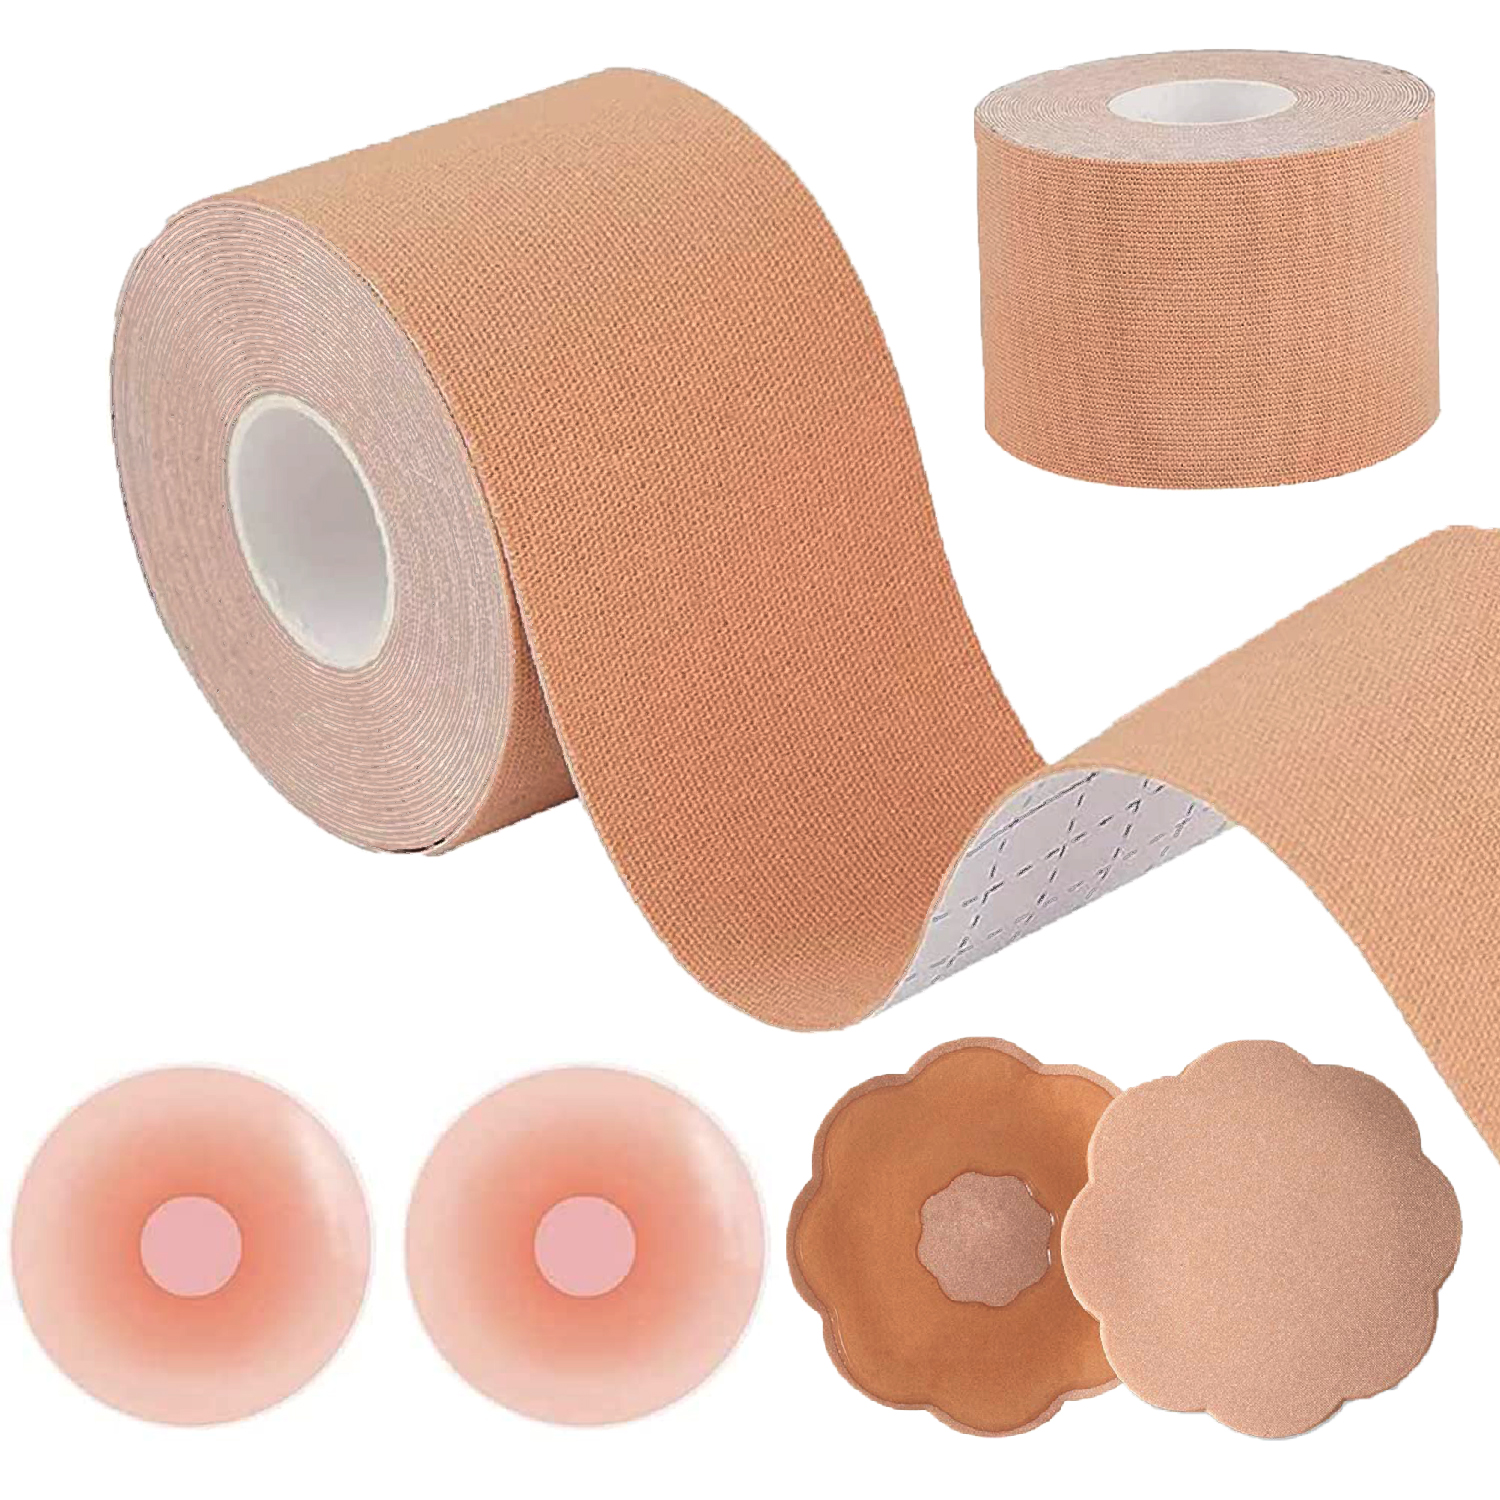 2pcs/set Invisible Silicone Nipple Covers & Breast Lift Tape Set